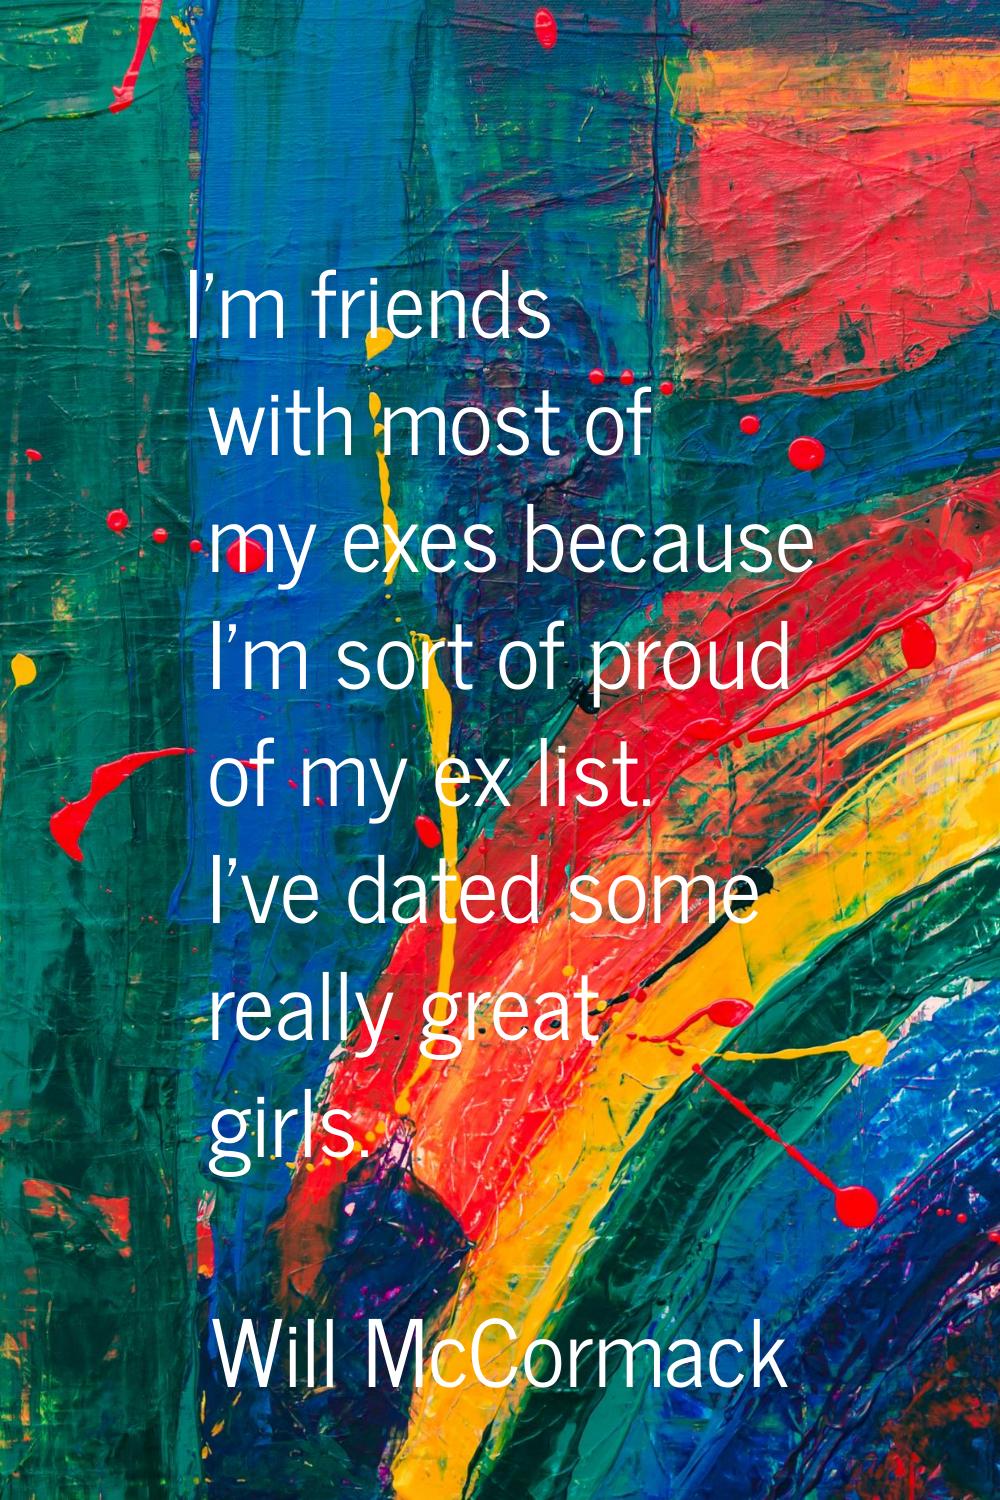 I'm friends with most of my exes because I'm sort of proud of my ex list. I've dated some really gr